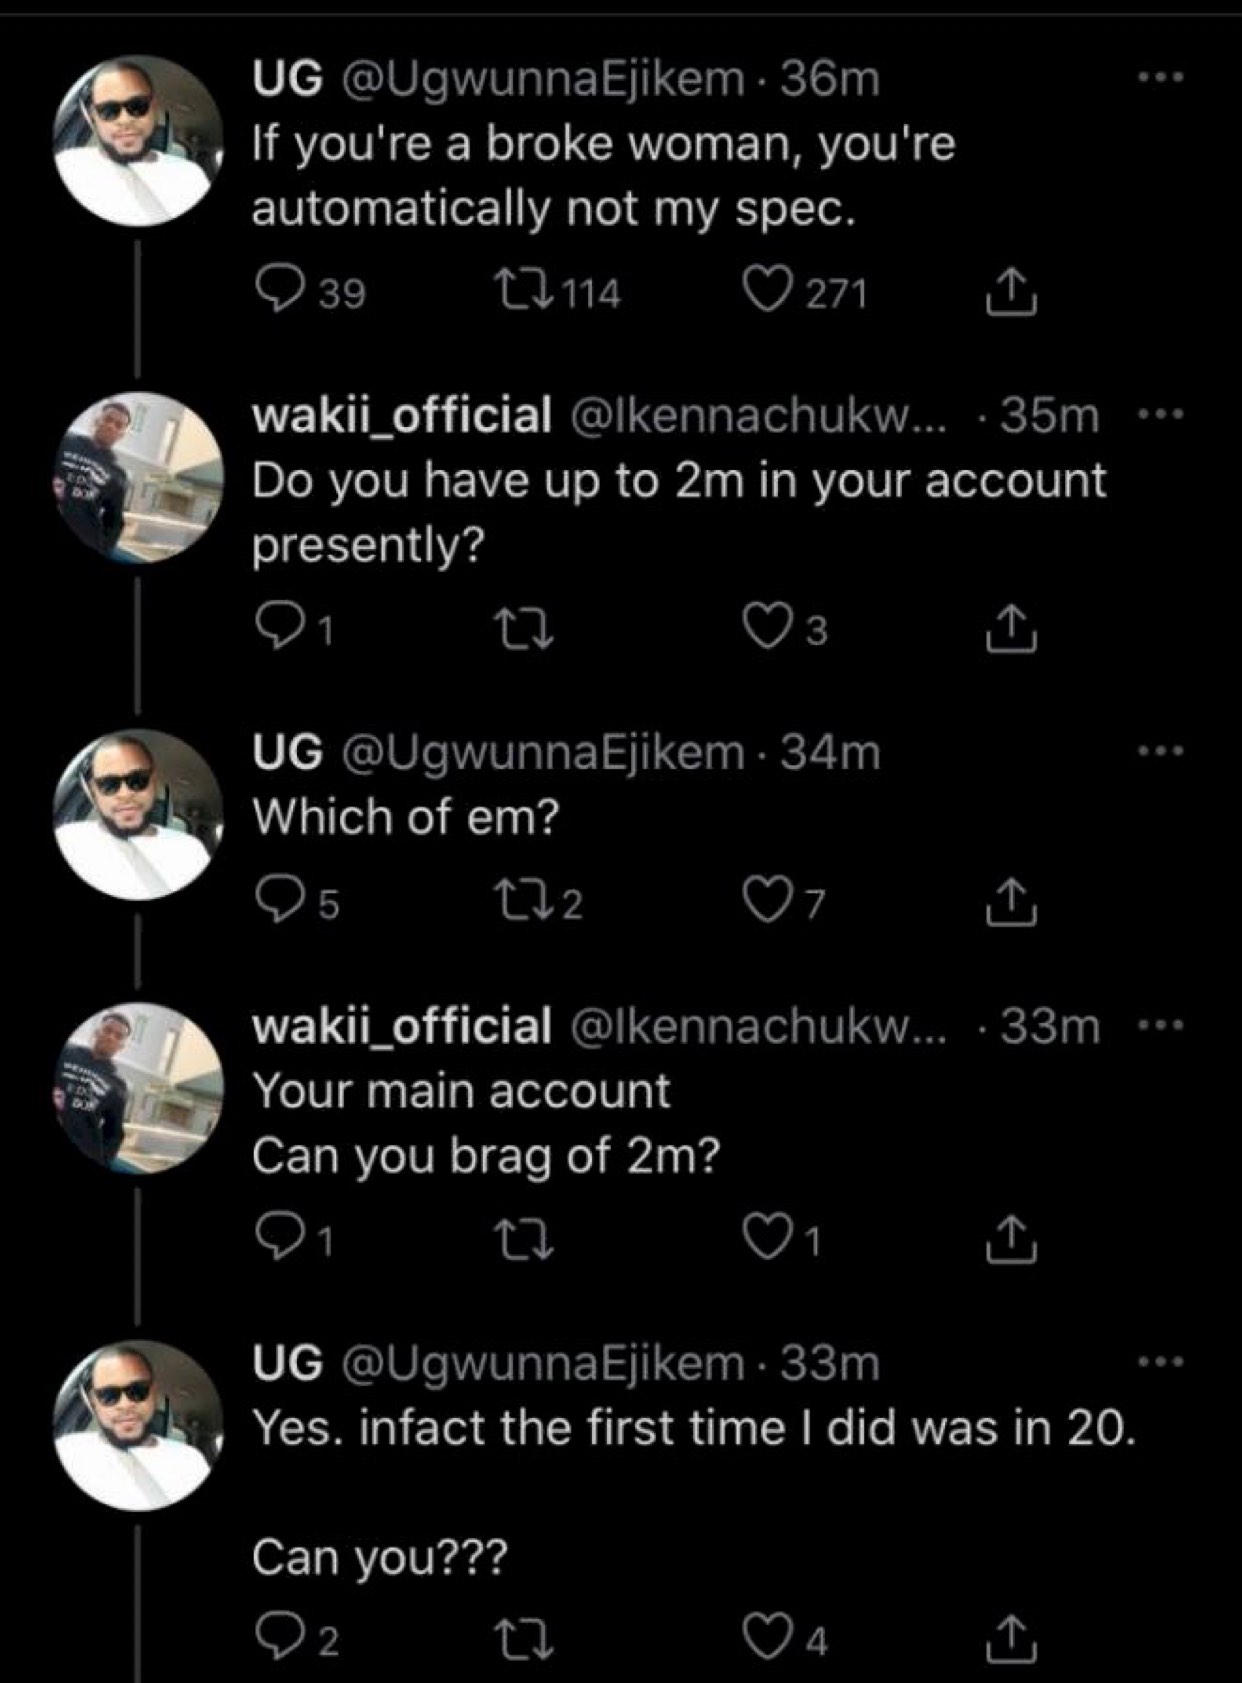 Man transfers N5,000 to young boy on twitter for being a “nuisance”